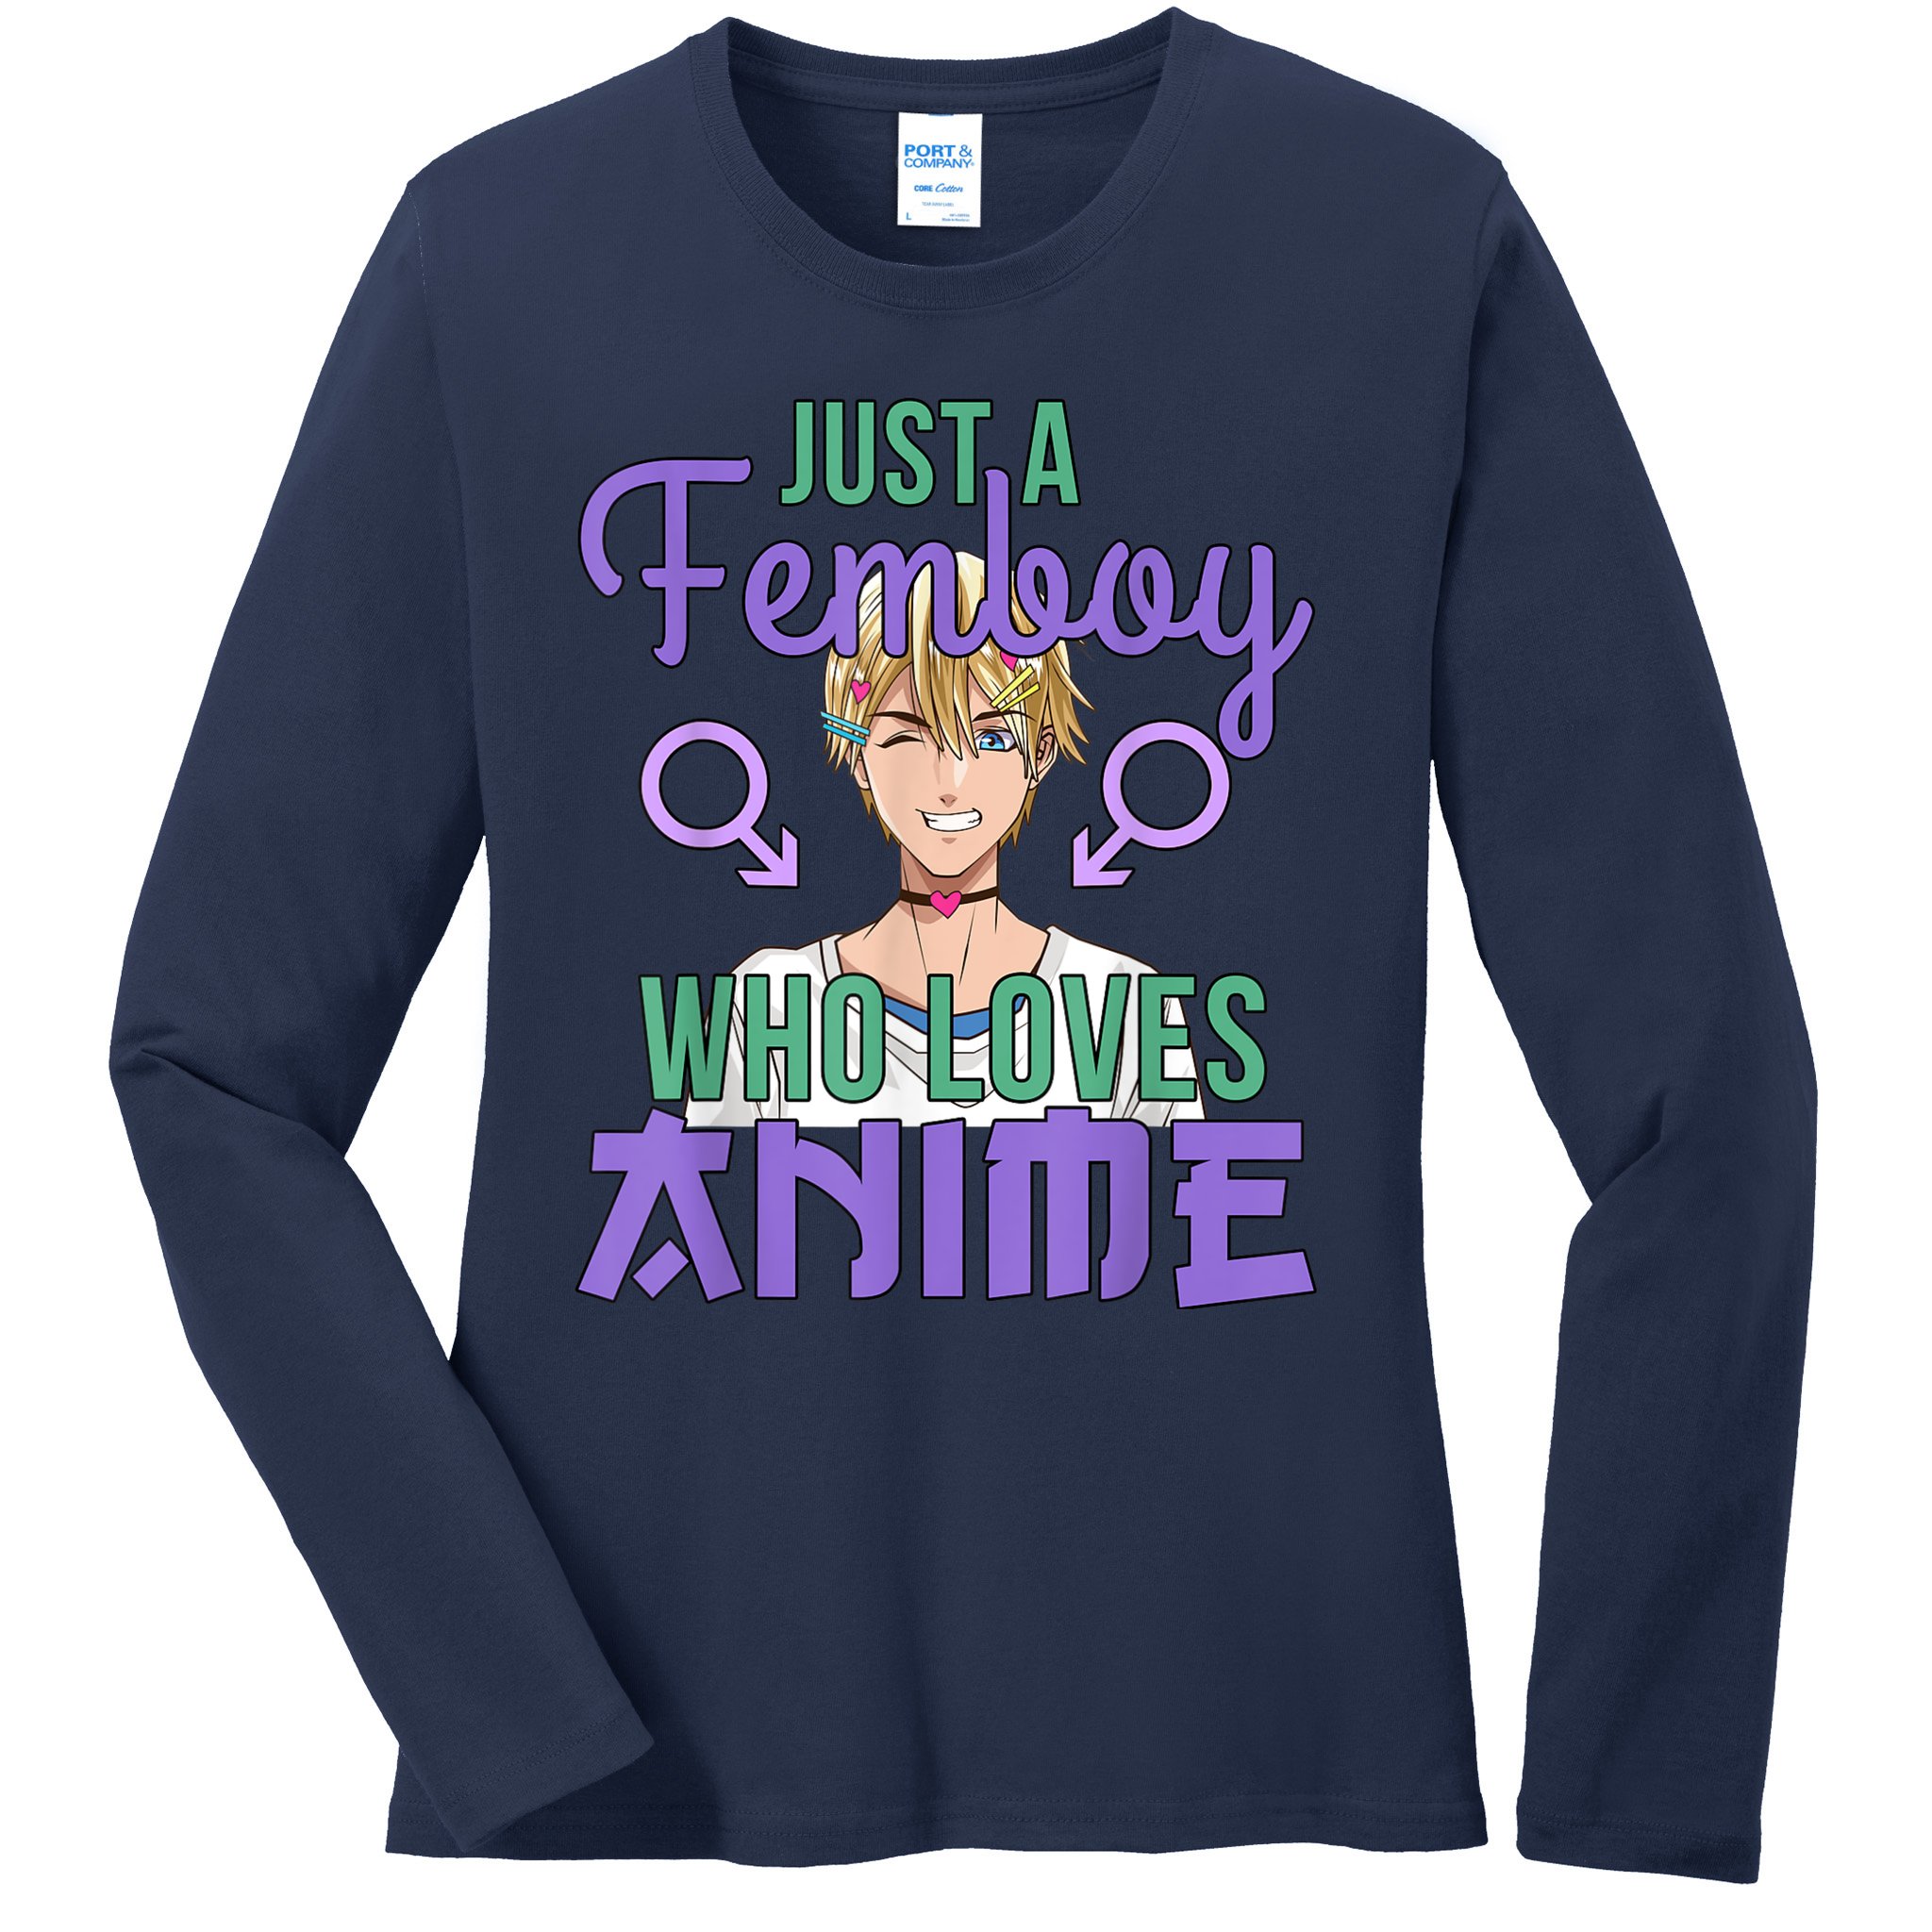 Men's Long Sleeve T-shirt With Anime Basketball Player Graphic